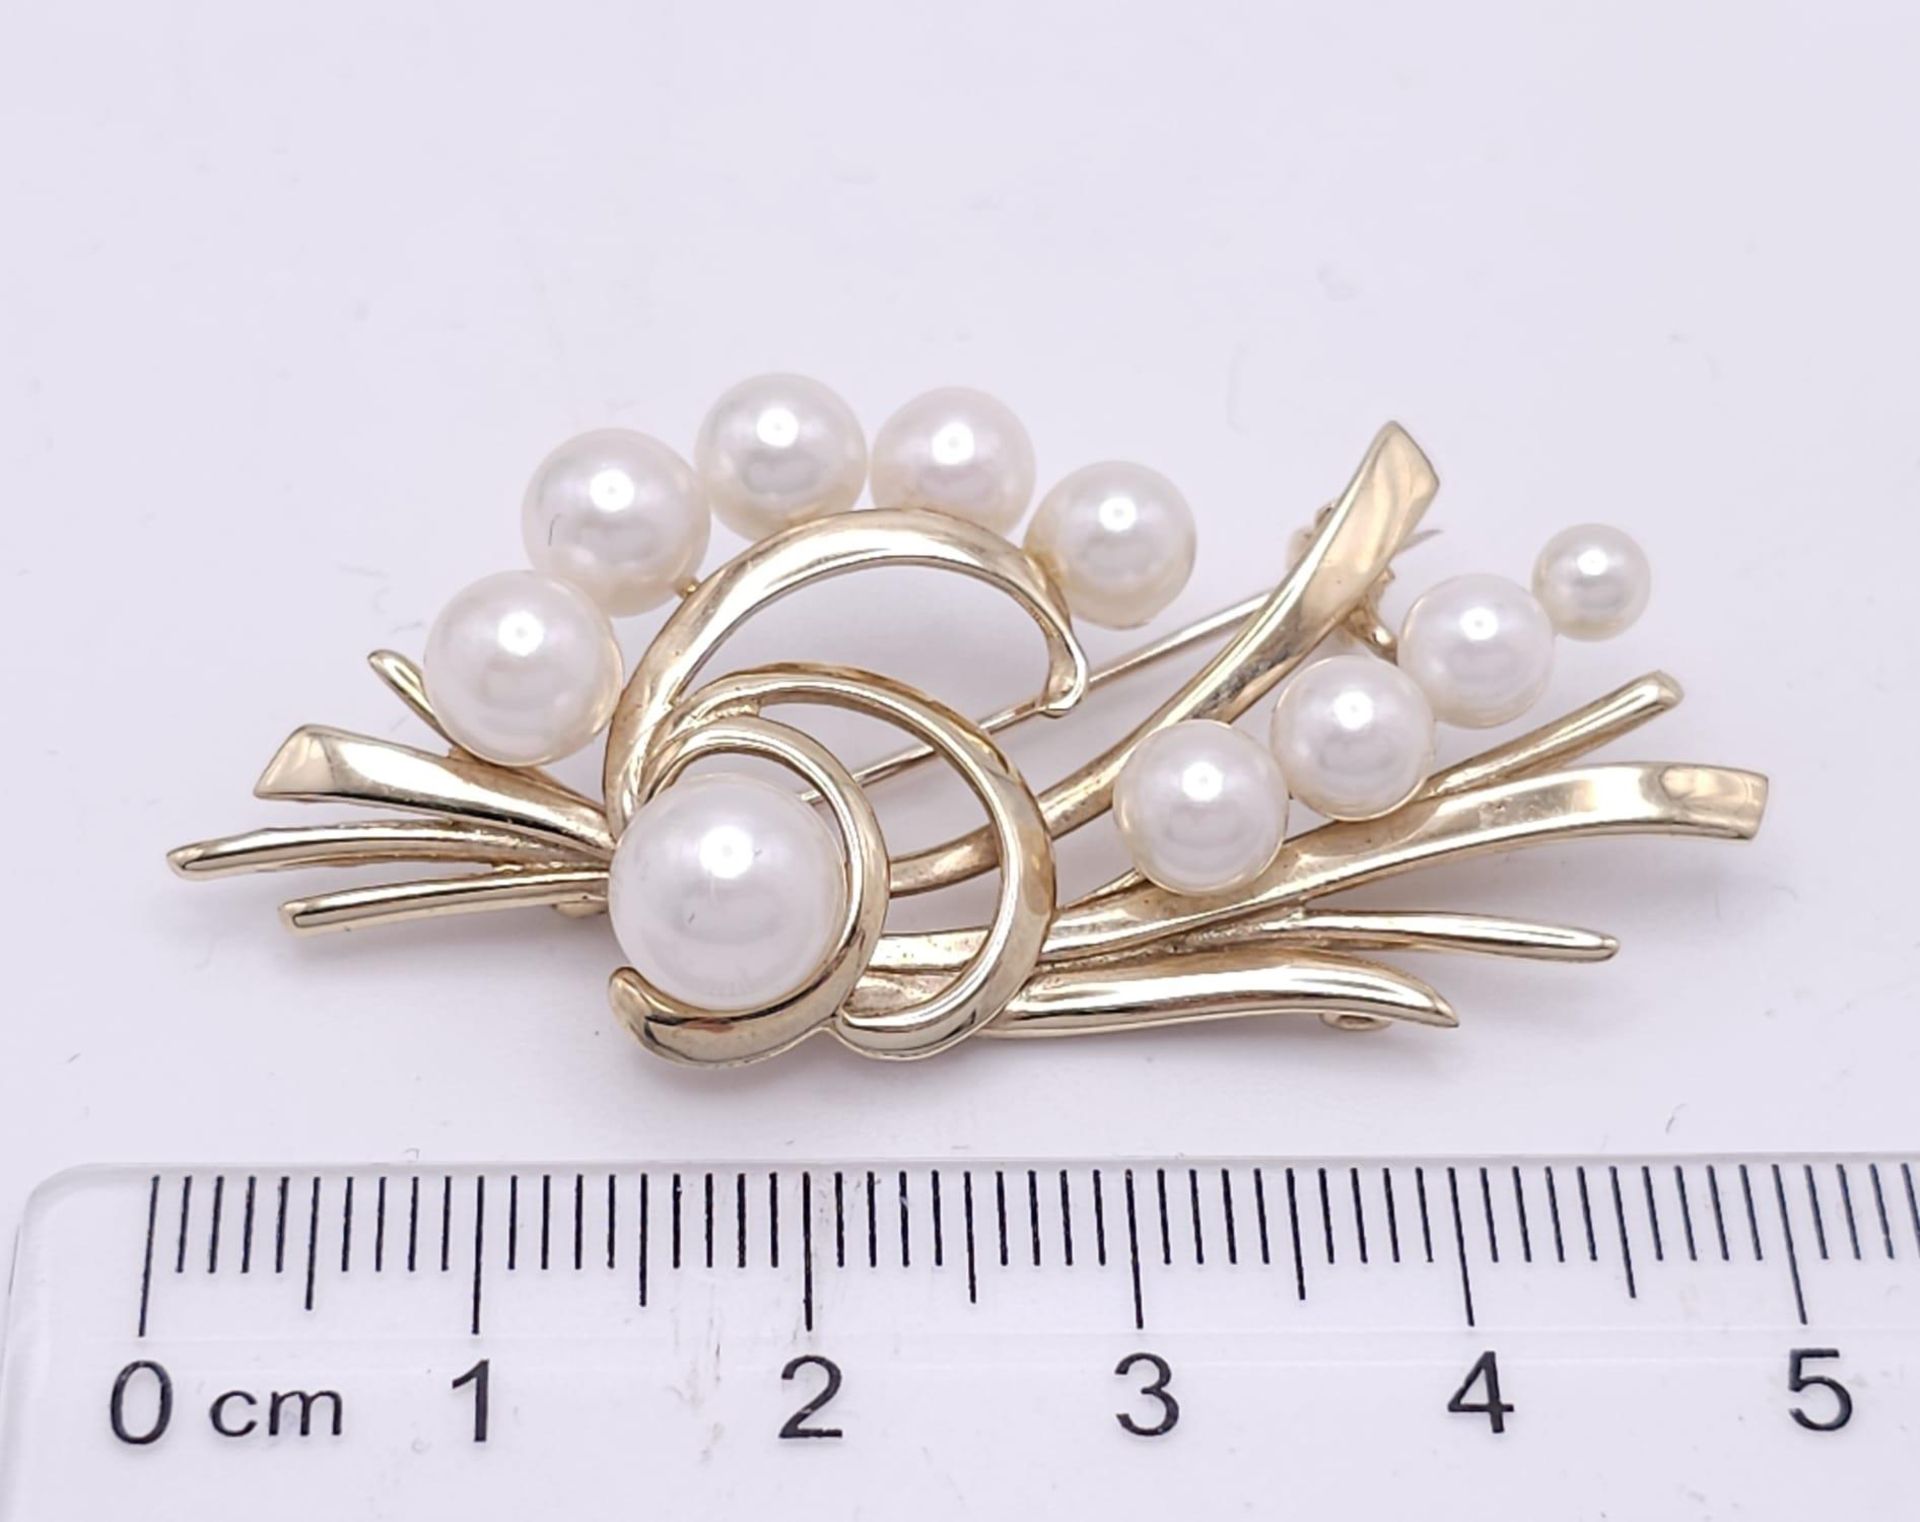 A 9k Yellow Gold and Pearl Decorative Floral Brooch. 5cm. 8g weight - Image 21 of 23